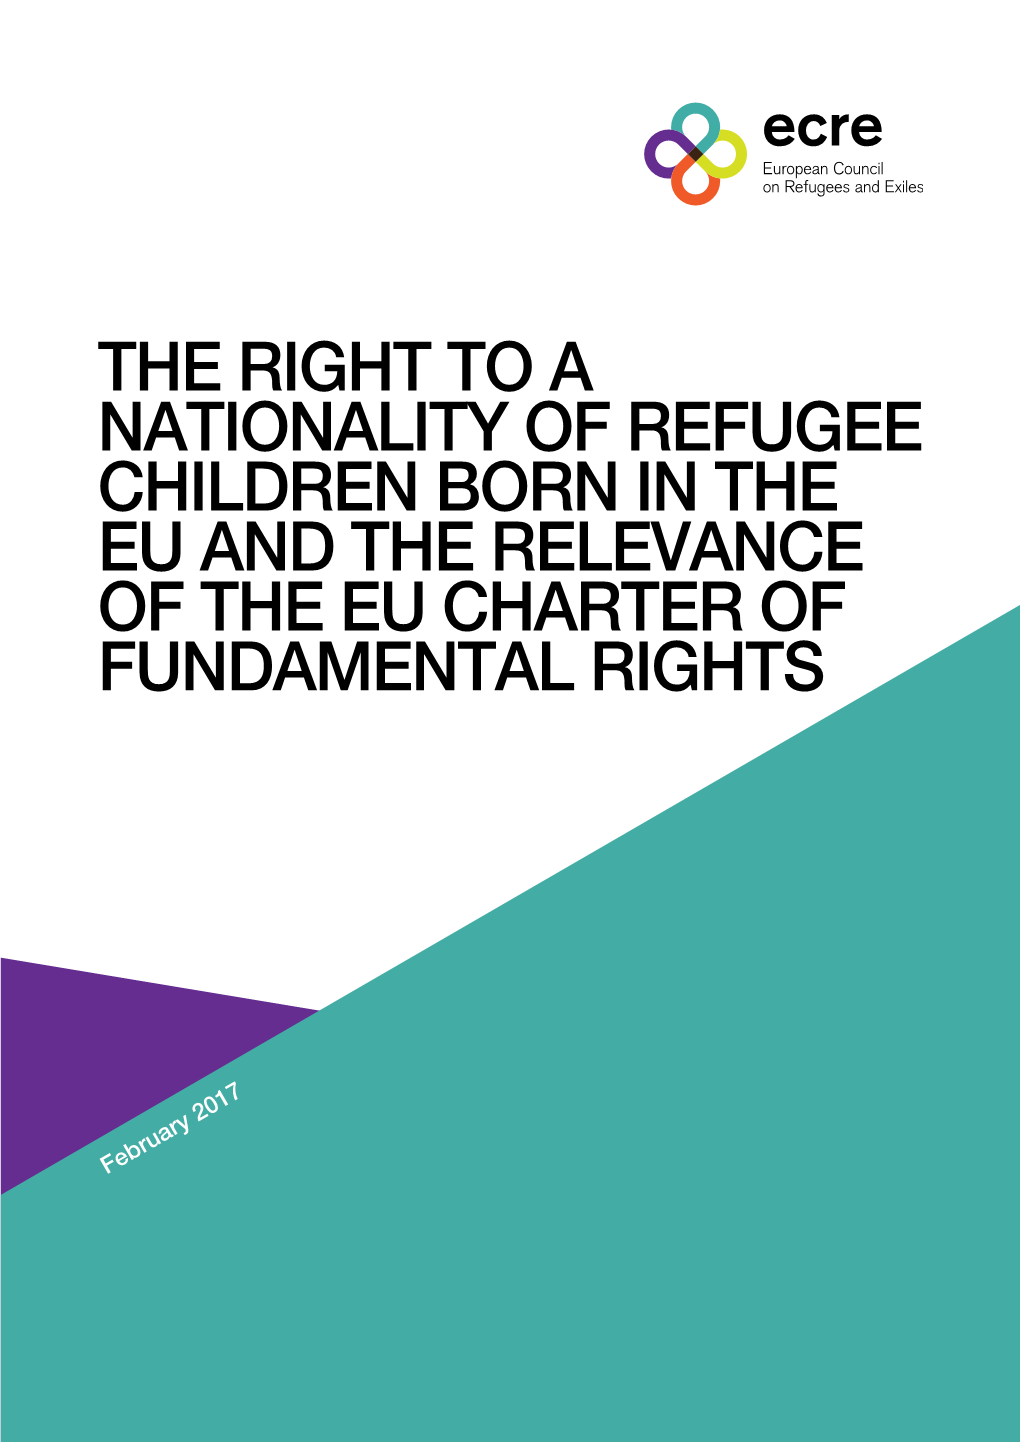 The Right to a Nationality of Refugee Children Born in the Eu and the Relevance of the Eu Charter of Fundamental Rights